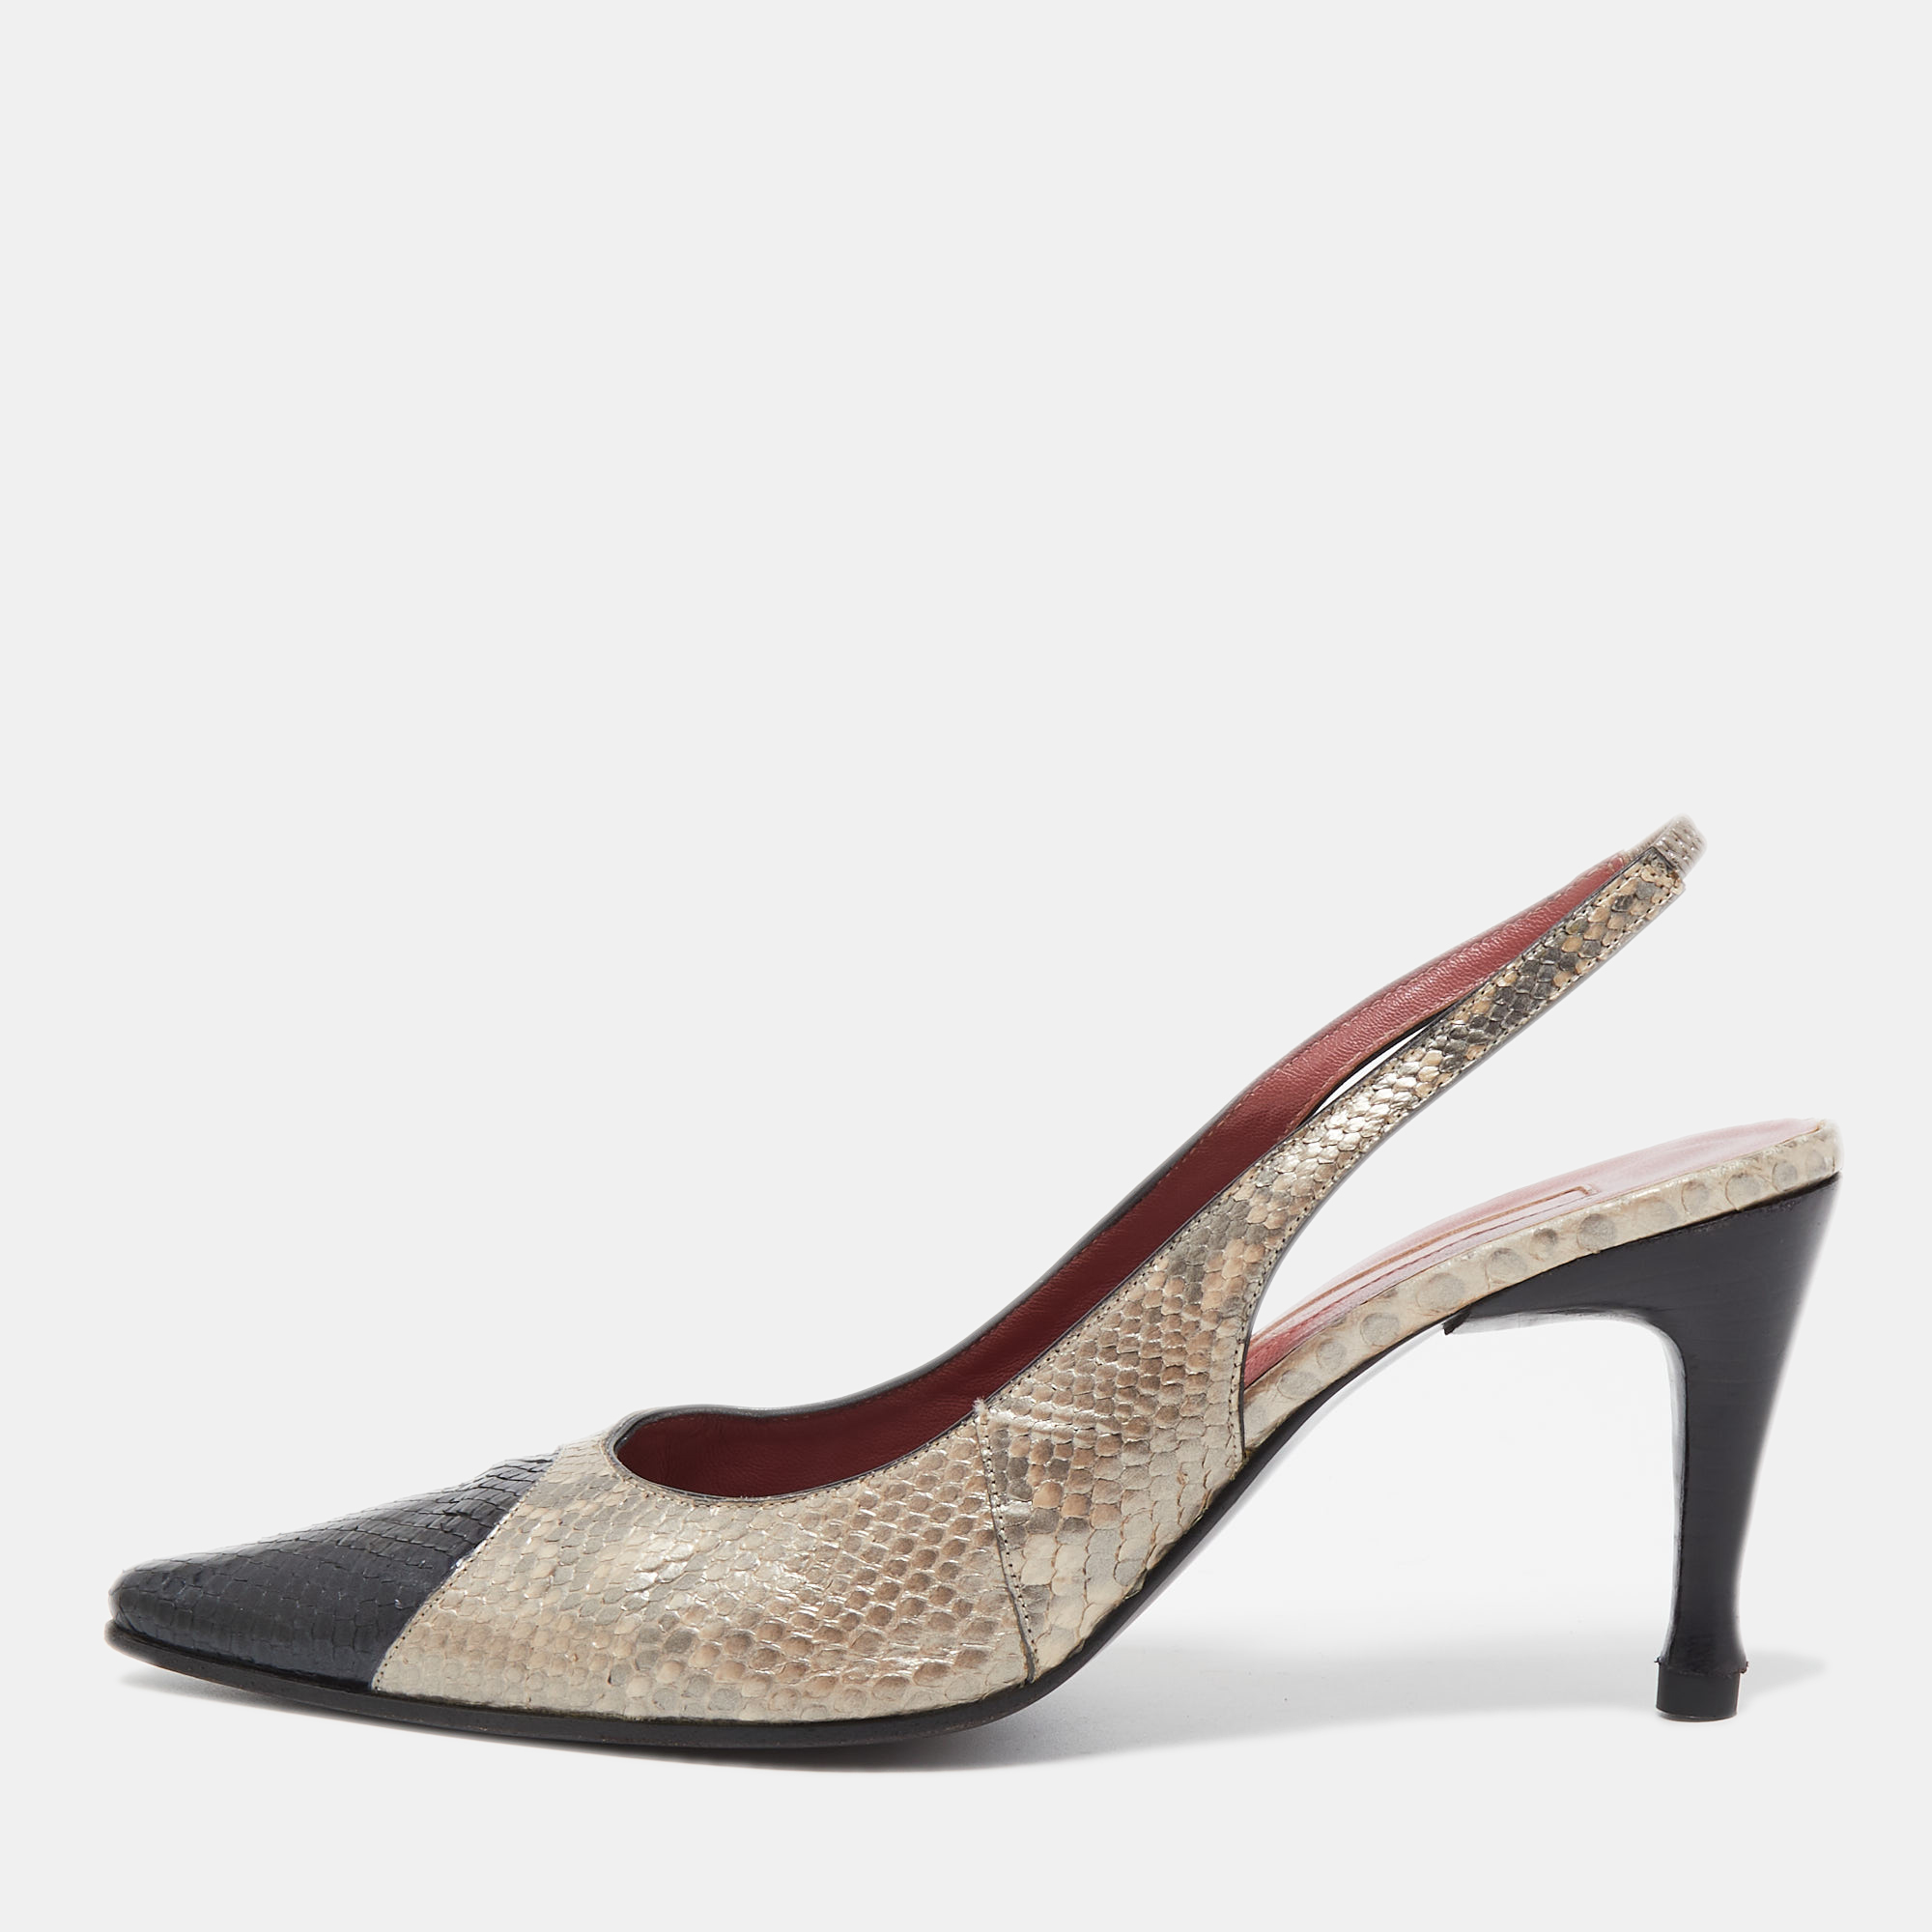 Sergio Rossi Two Tone Snakeskin Slingback Pumps Size 39